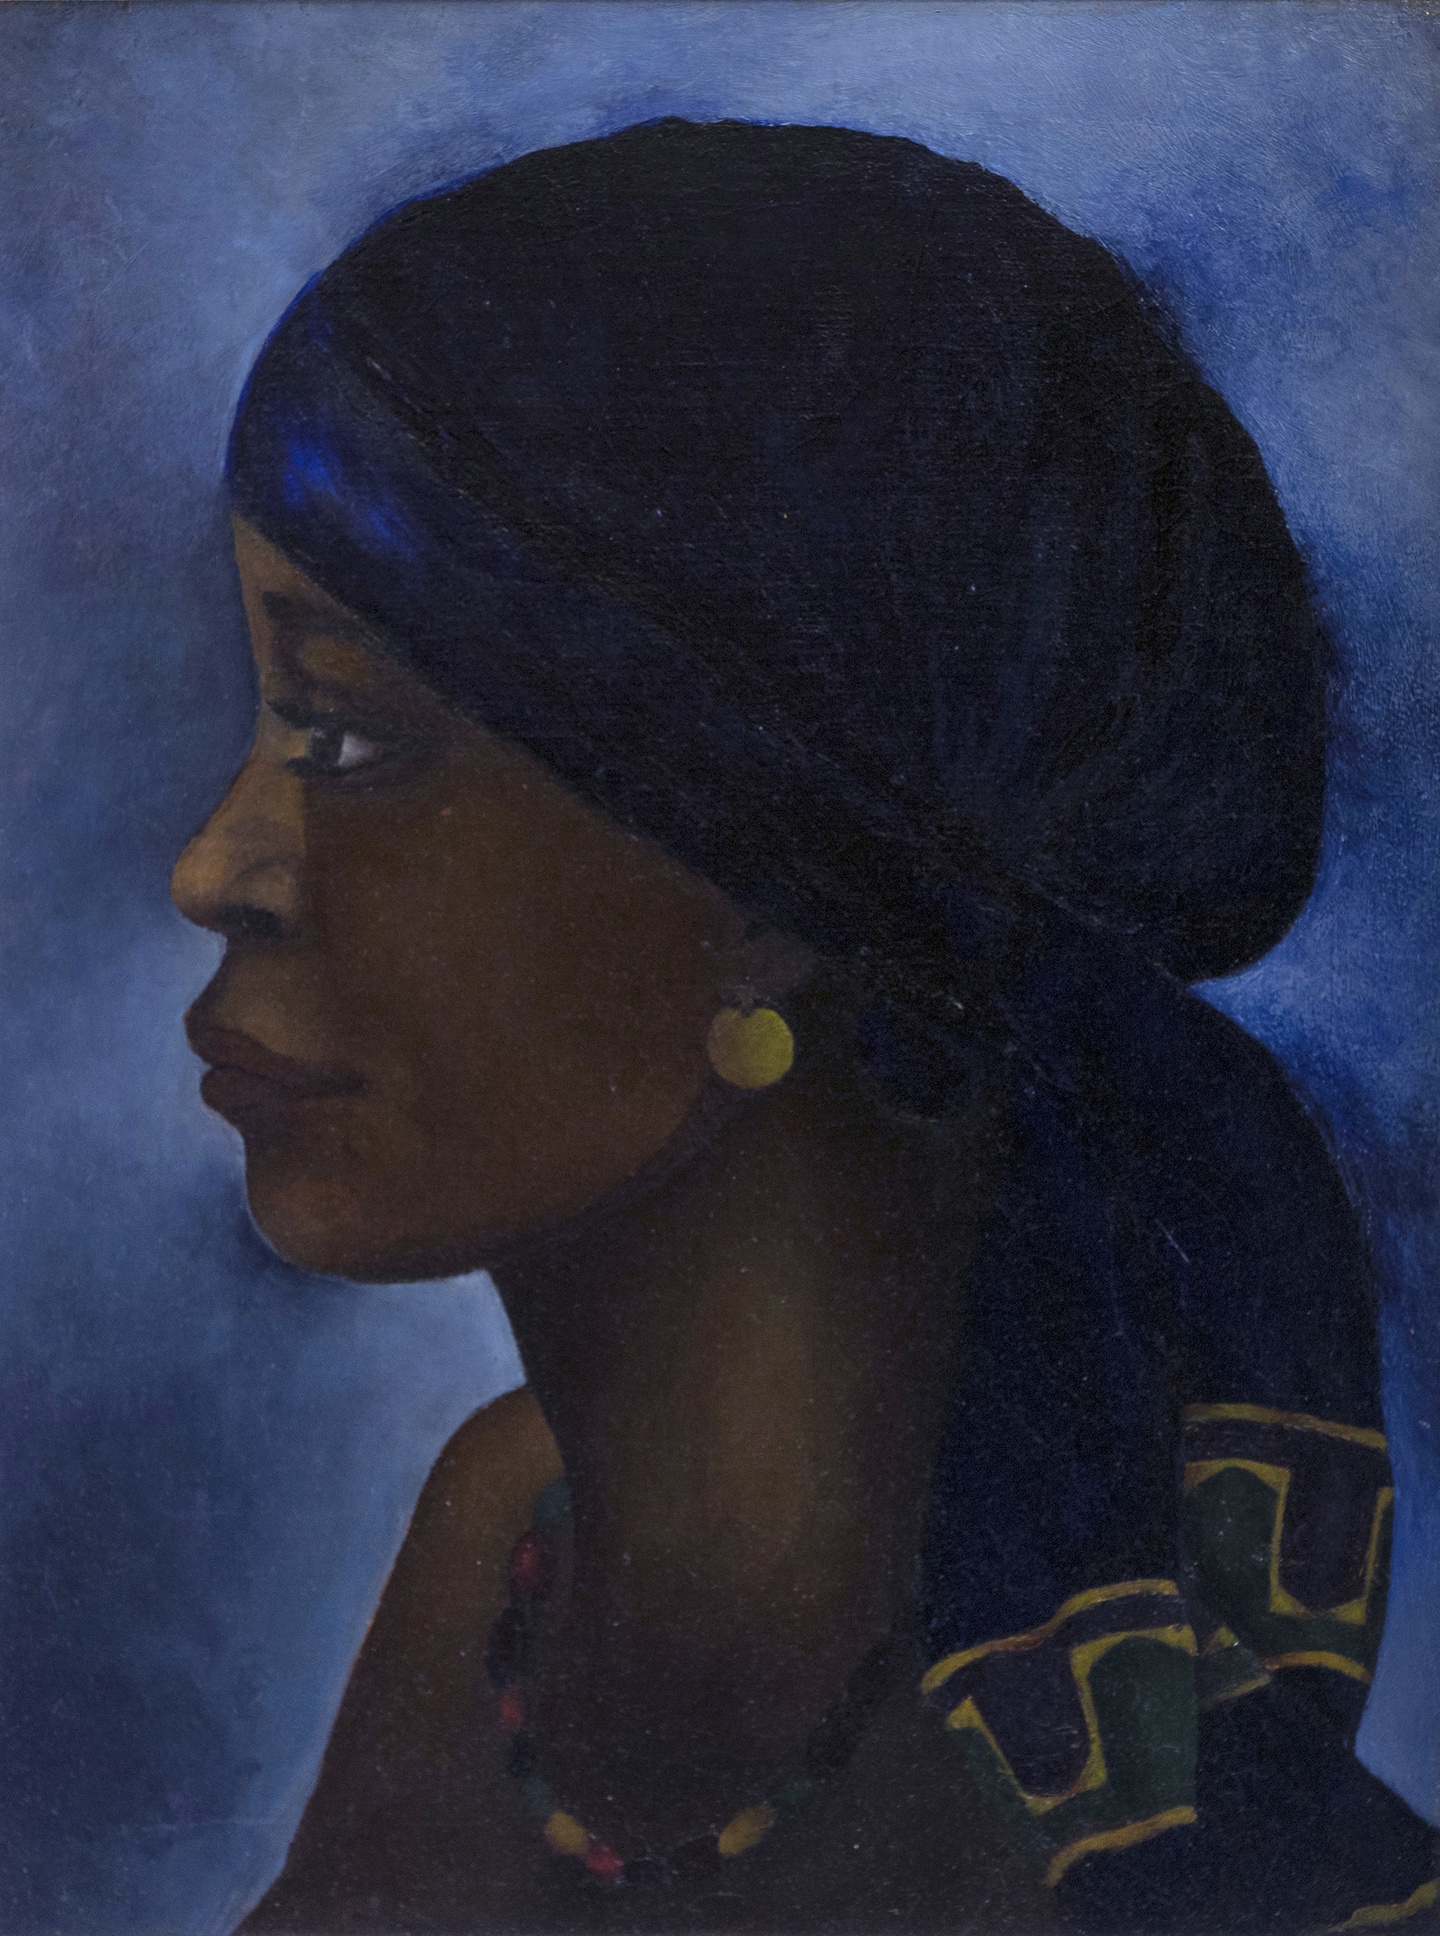 A painted portrait in profile of a Black woman wearing a headscarf, against a dark blue background